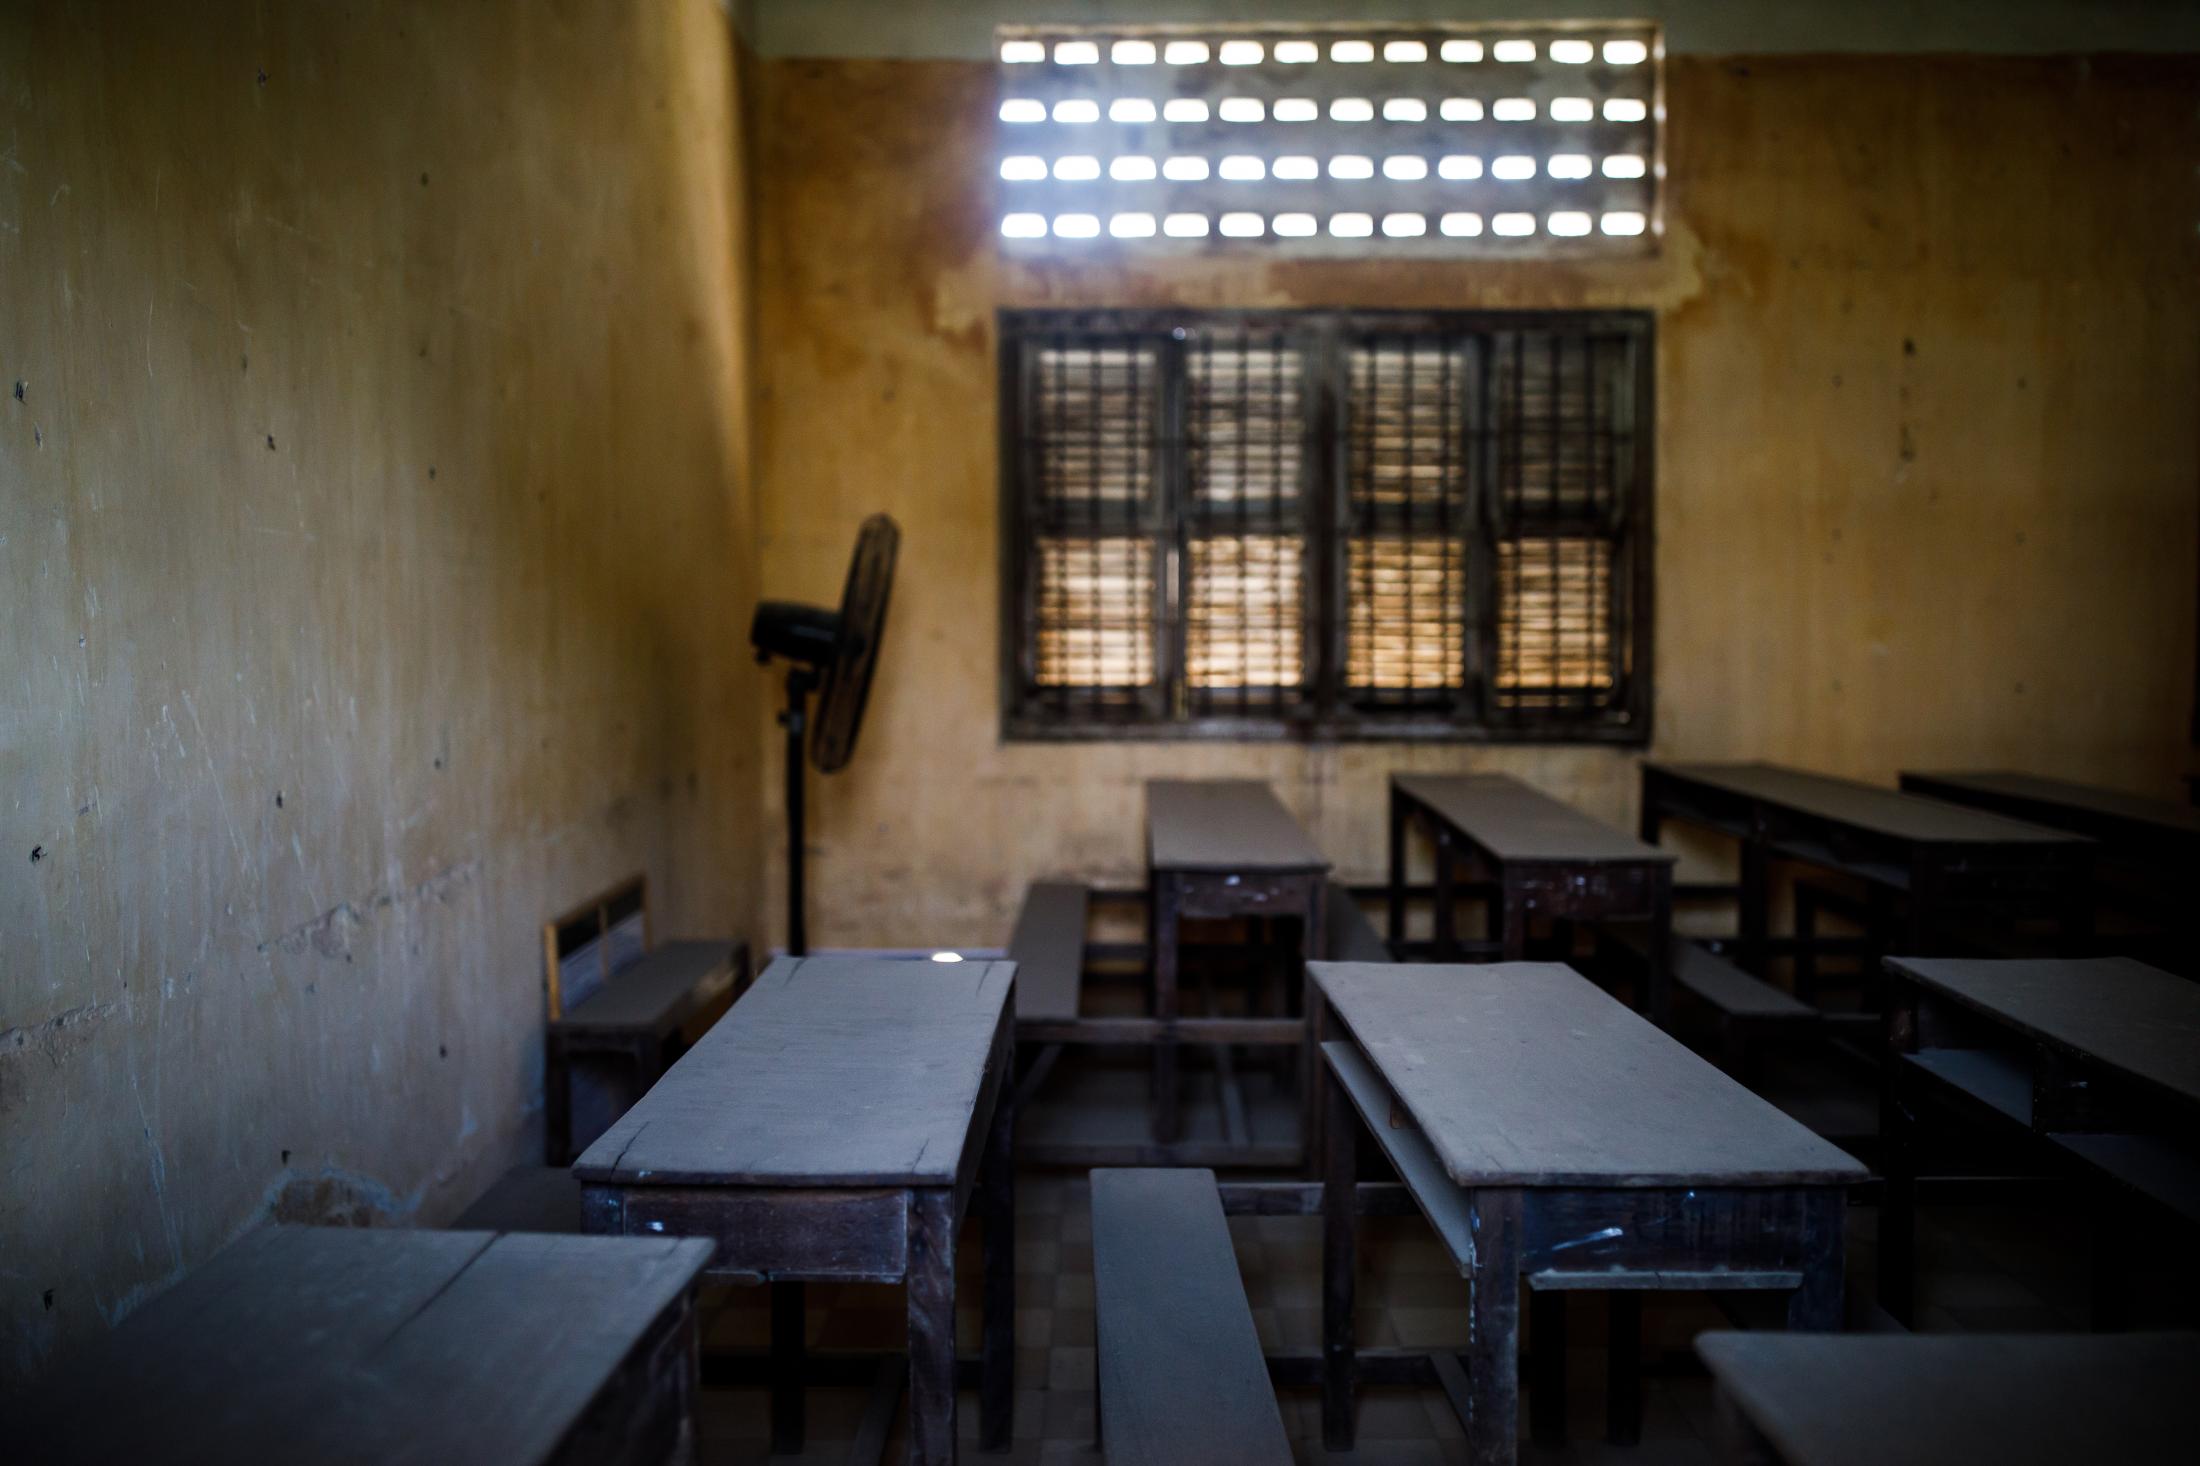  Former classroom inside the Tuol Sleng Genocide Museum. Before the building were used as a secret facility for detention, interrogation, torture and extermination of the political enemies of the regime it was as a school. Between April of 1975 and January of 1979, the Khmer Rouge regime was responsible for the death of about 2 million people in Cambodia, in one of the most lethal regimes of the 20th century. 2019 marked the 40th anniversary of the fall of the Khmer Rouge regime. Phnom Penh, Cambodia. 